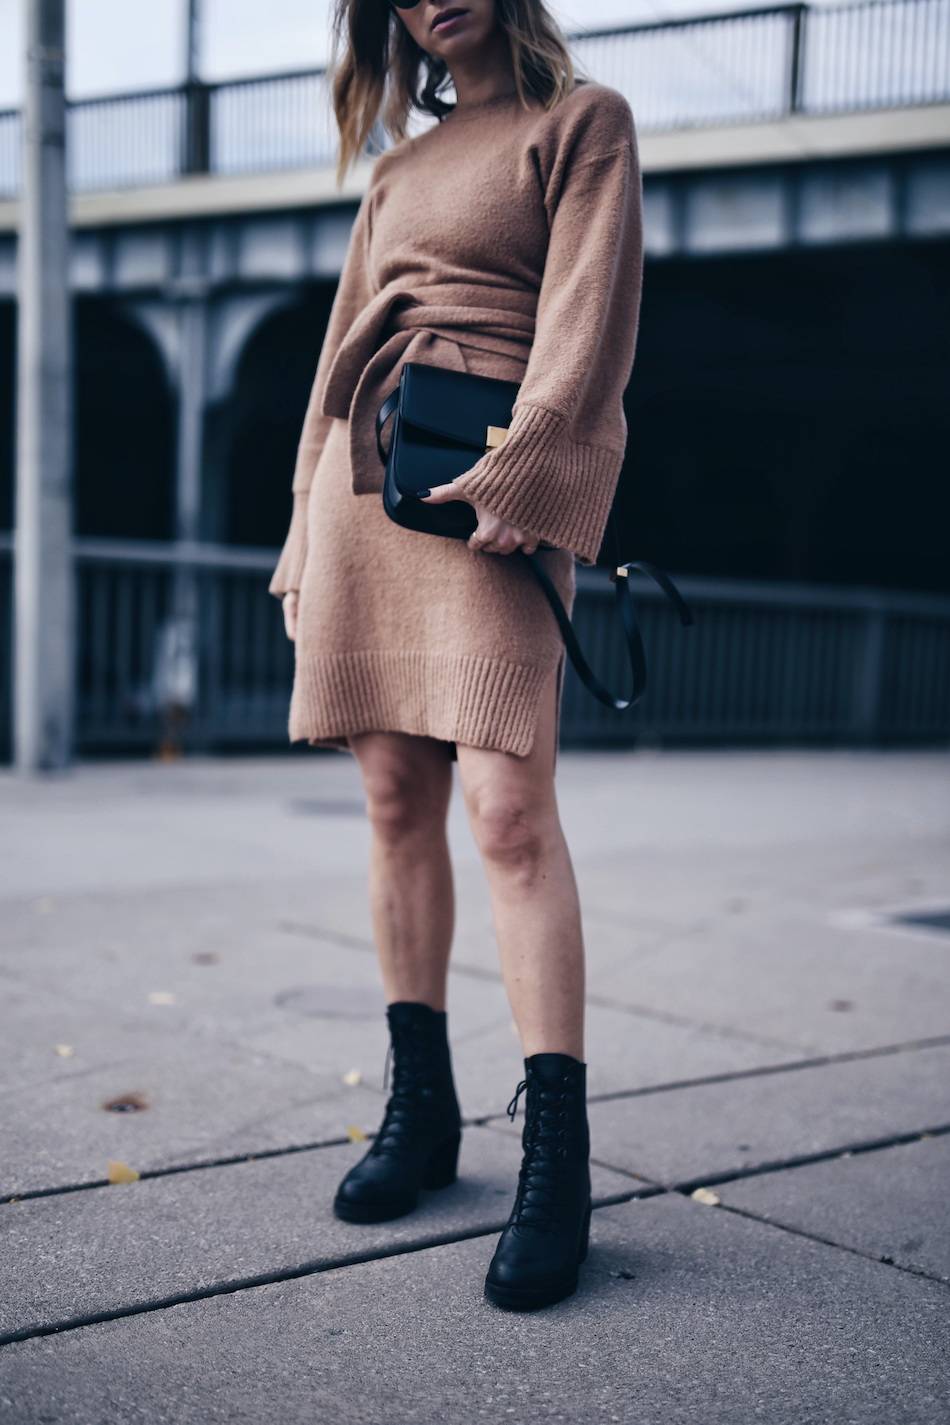 style-blogger-jill-lansky-of-the-august-diaries-wearing-3-1-phillip-lim-knit-dress-celine-black-box-bag-and-ld-tuttle-combat-boots